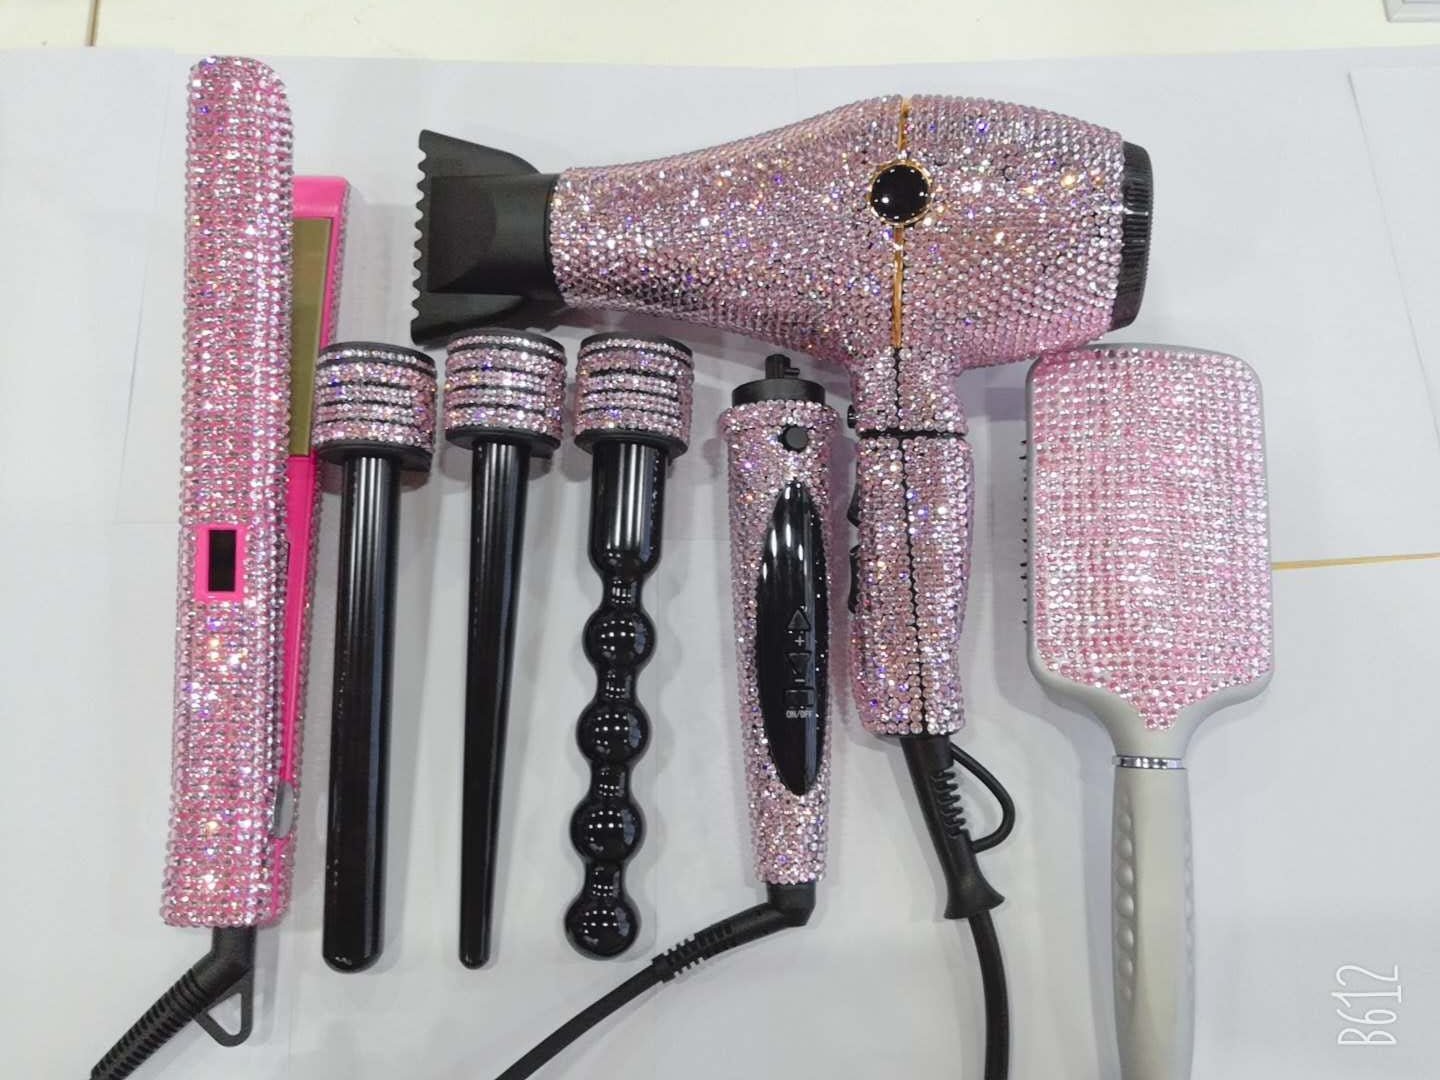 Professional hot hair tools bling rhinestone salon hair tools set flat iron and hair dryer with curling wand sets | Electrr Inc